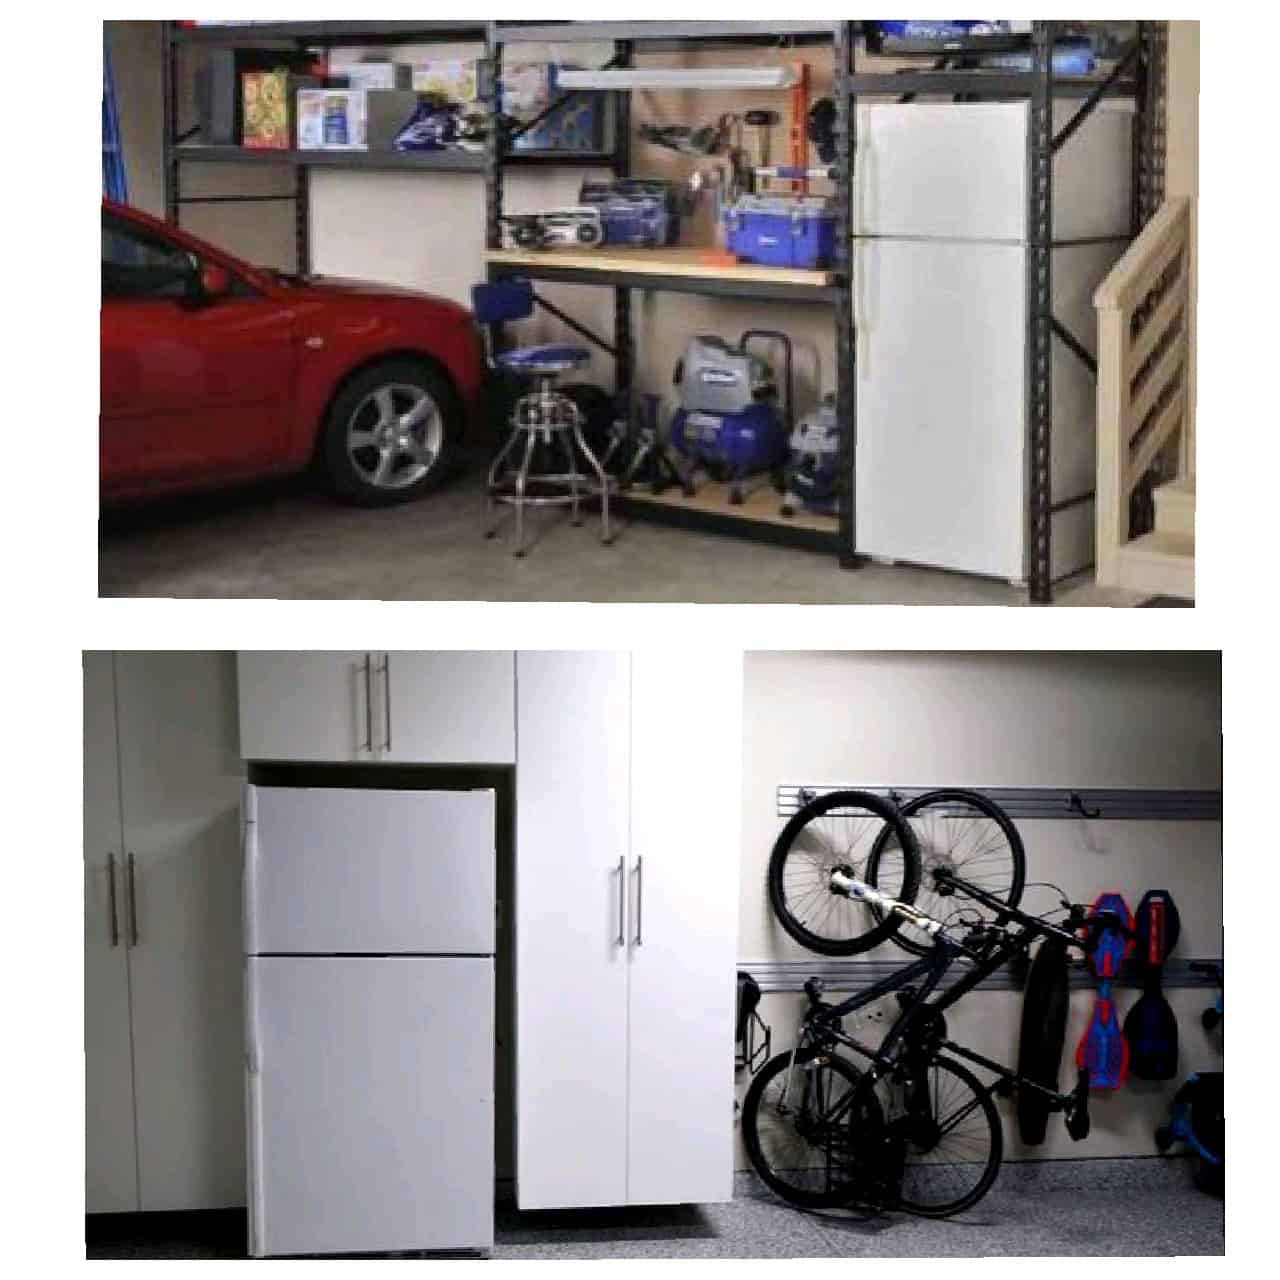 Unheated Garage Shed Or Outbuilding, Can A Freezer Be Used In An Unheated Garage